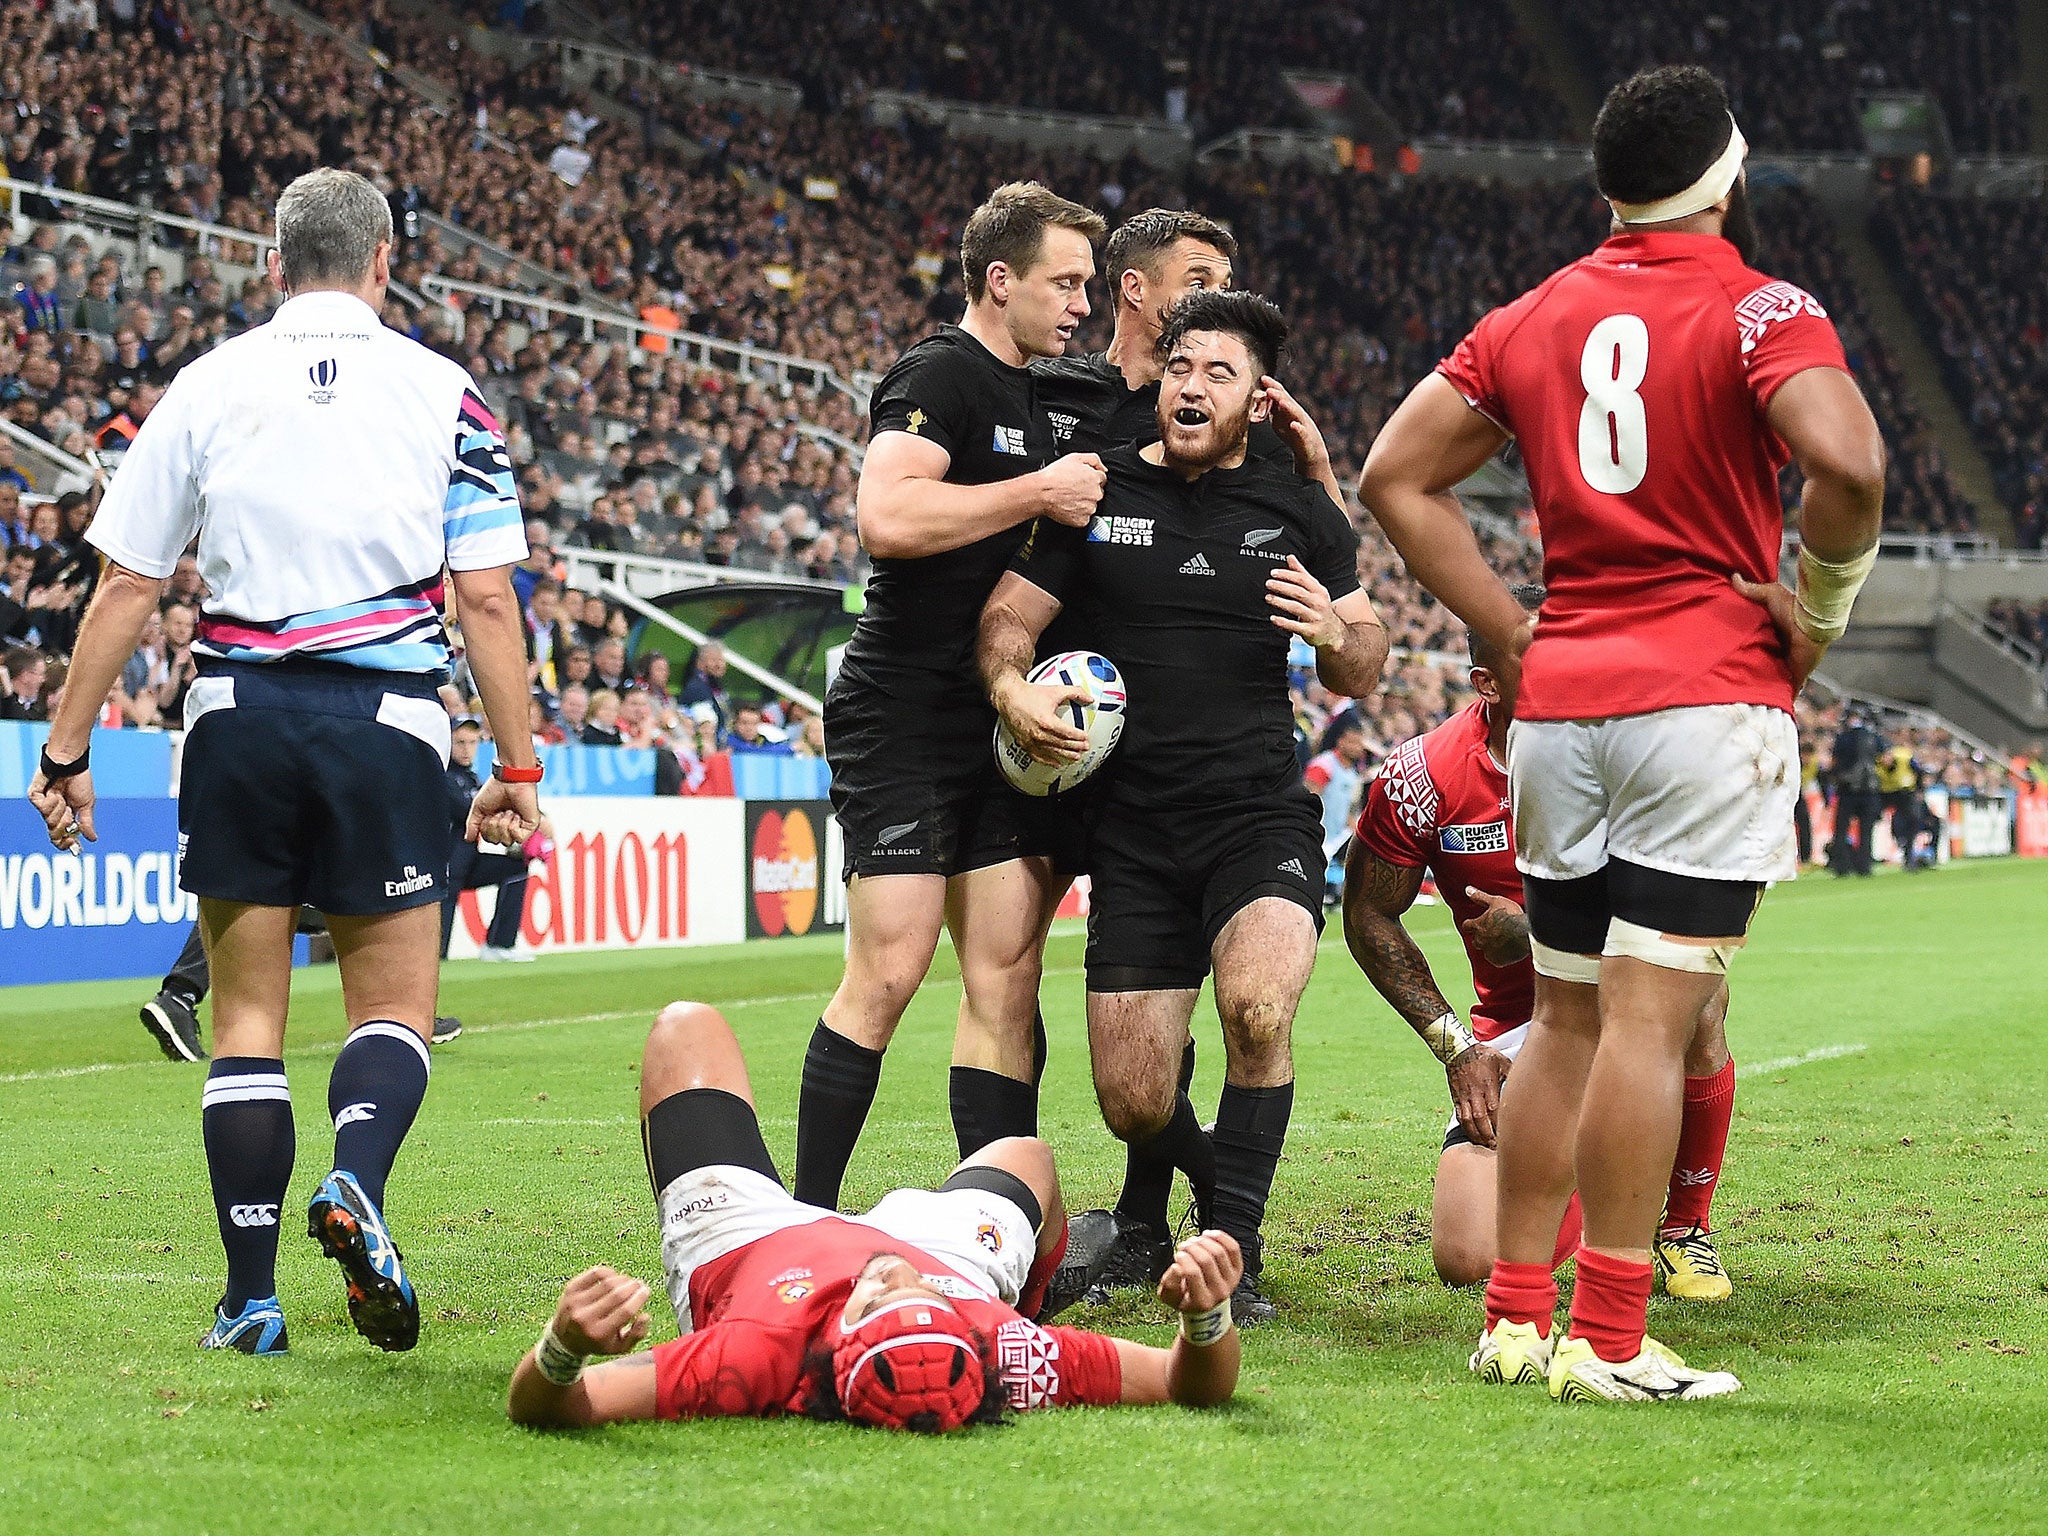 Nehe Milner-Skudder scores his first try for New Zealand against Tonga